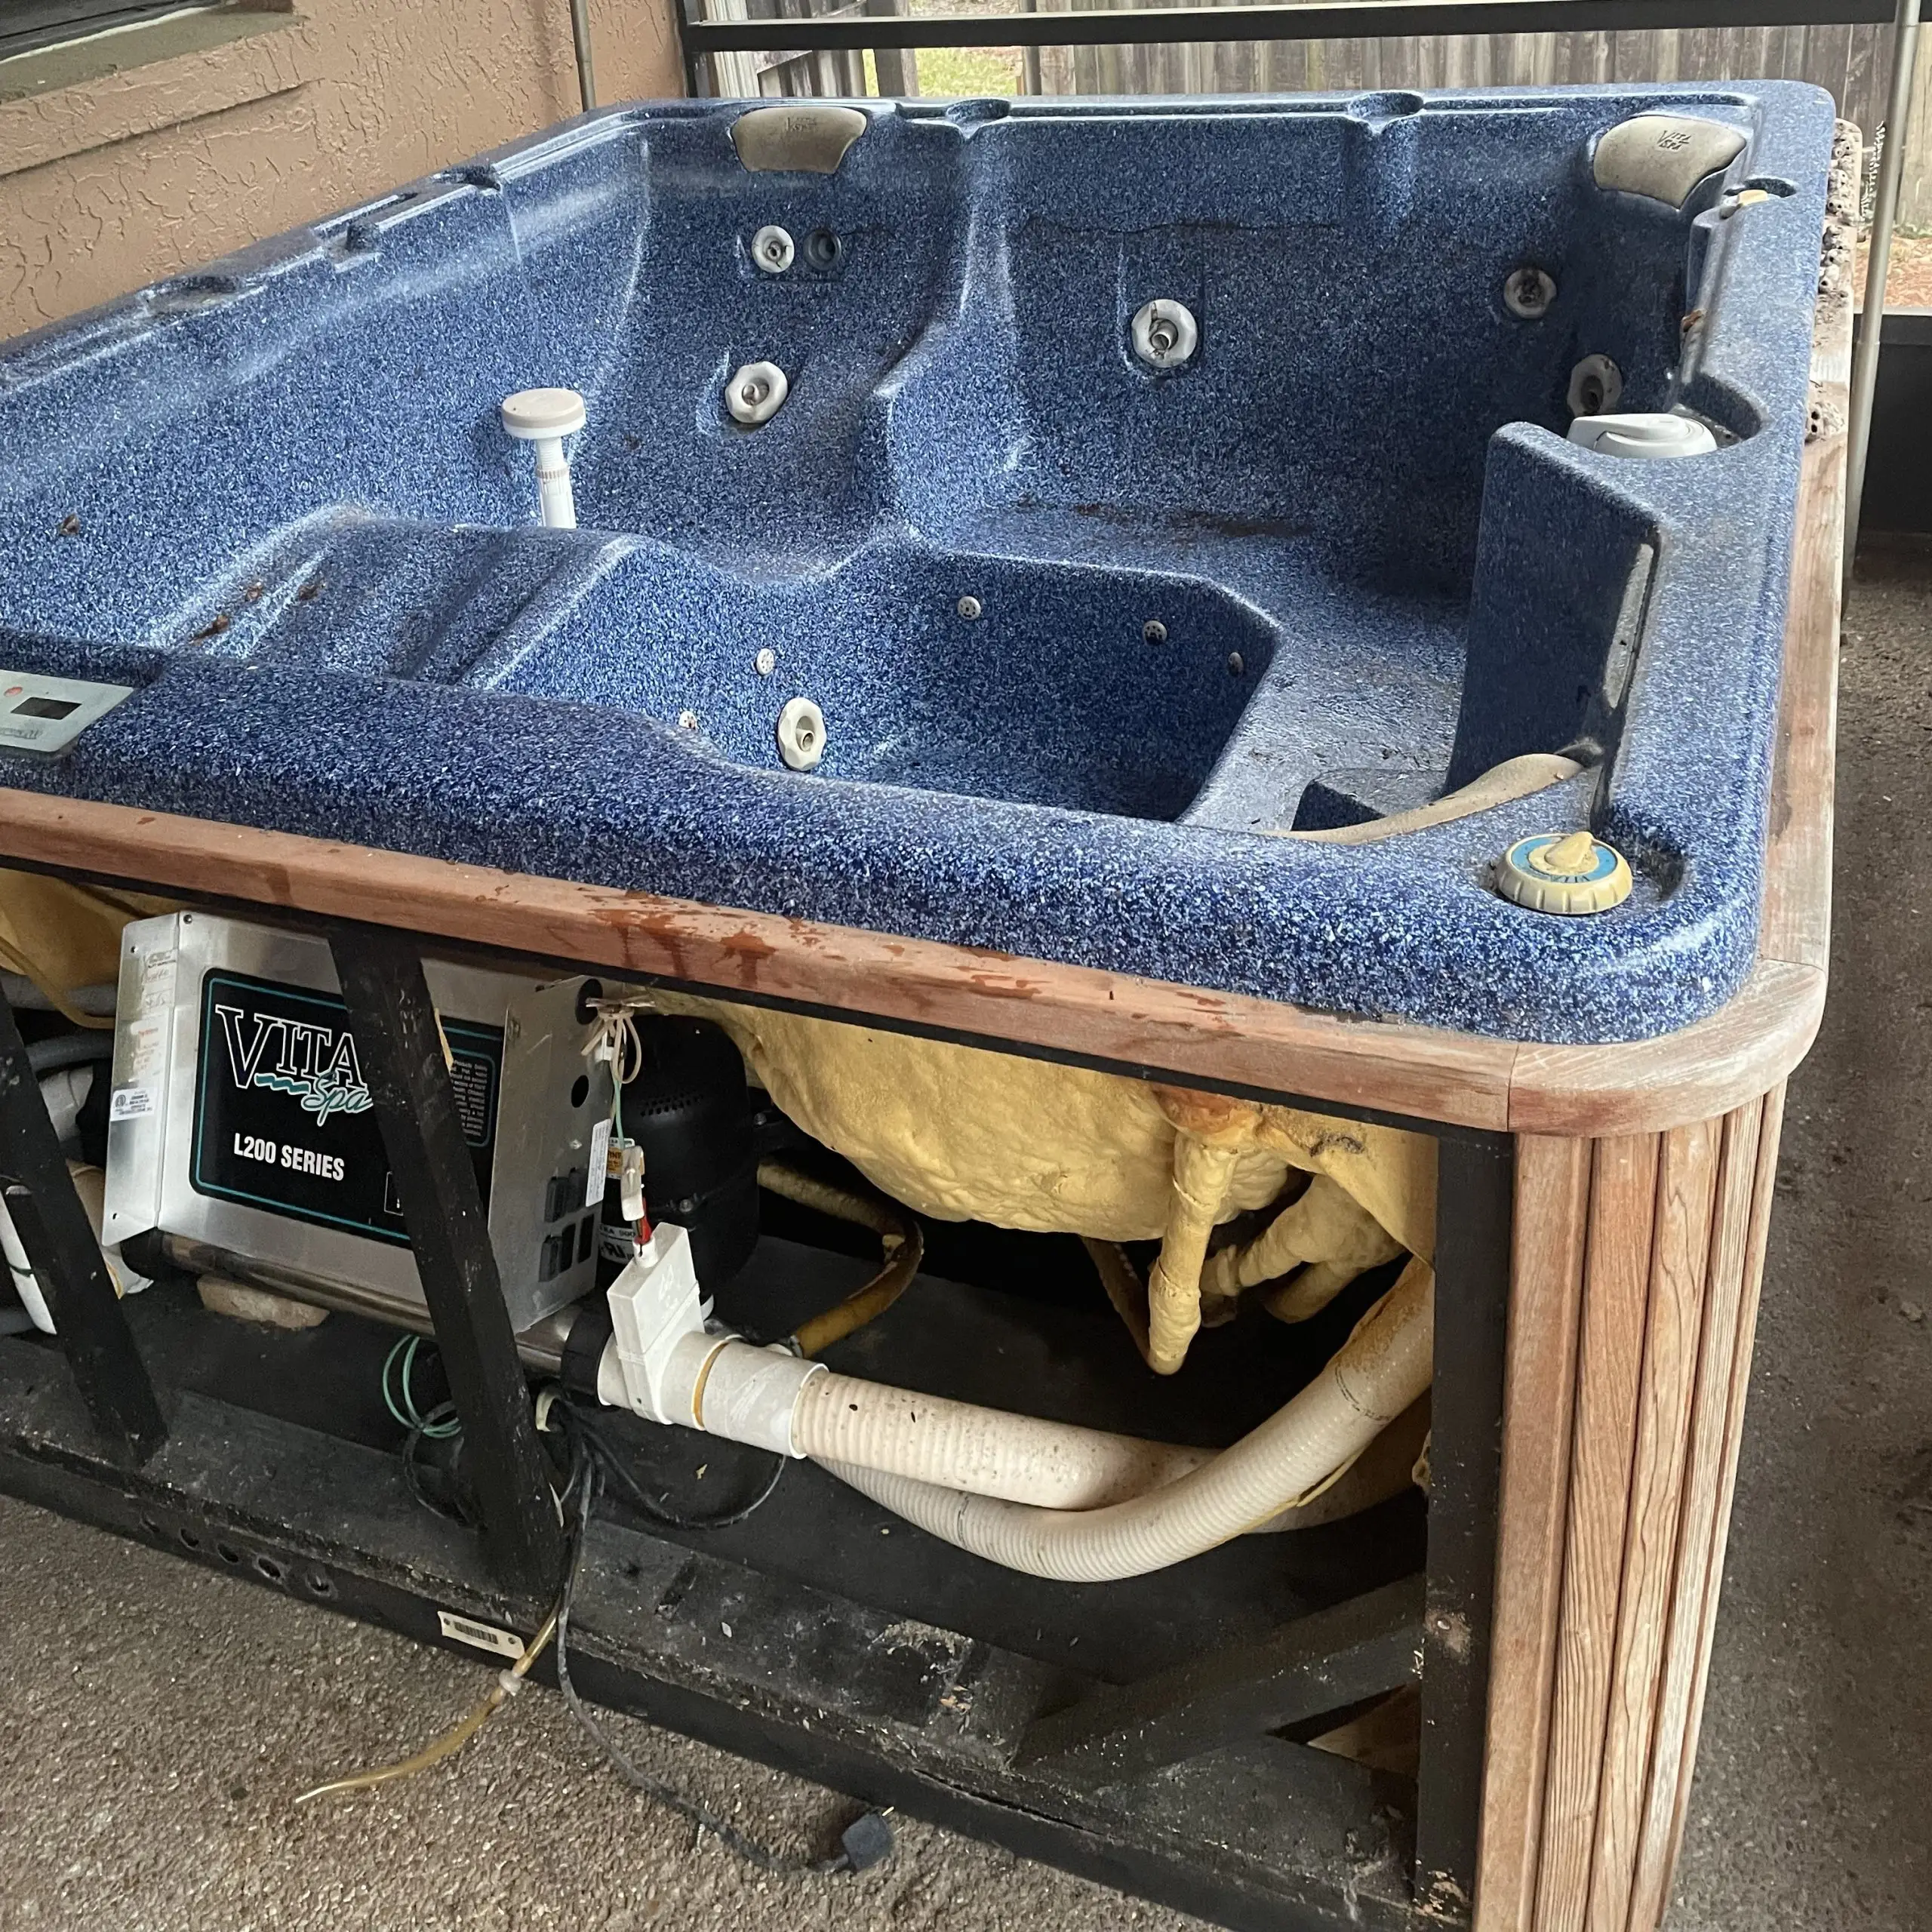 Hot Tub Removal Before